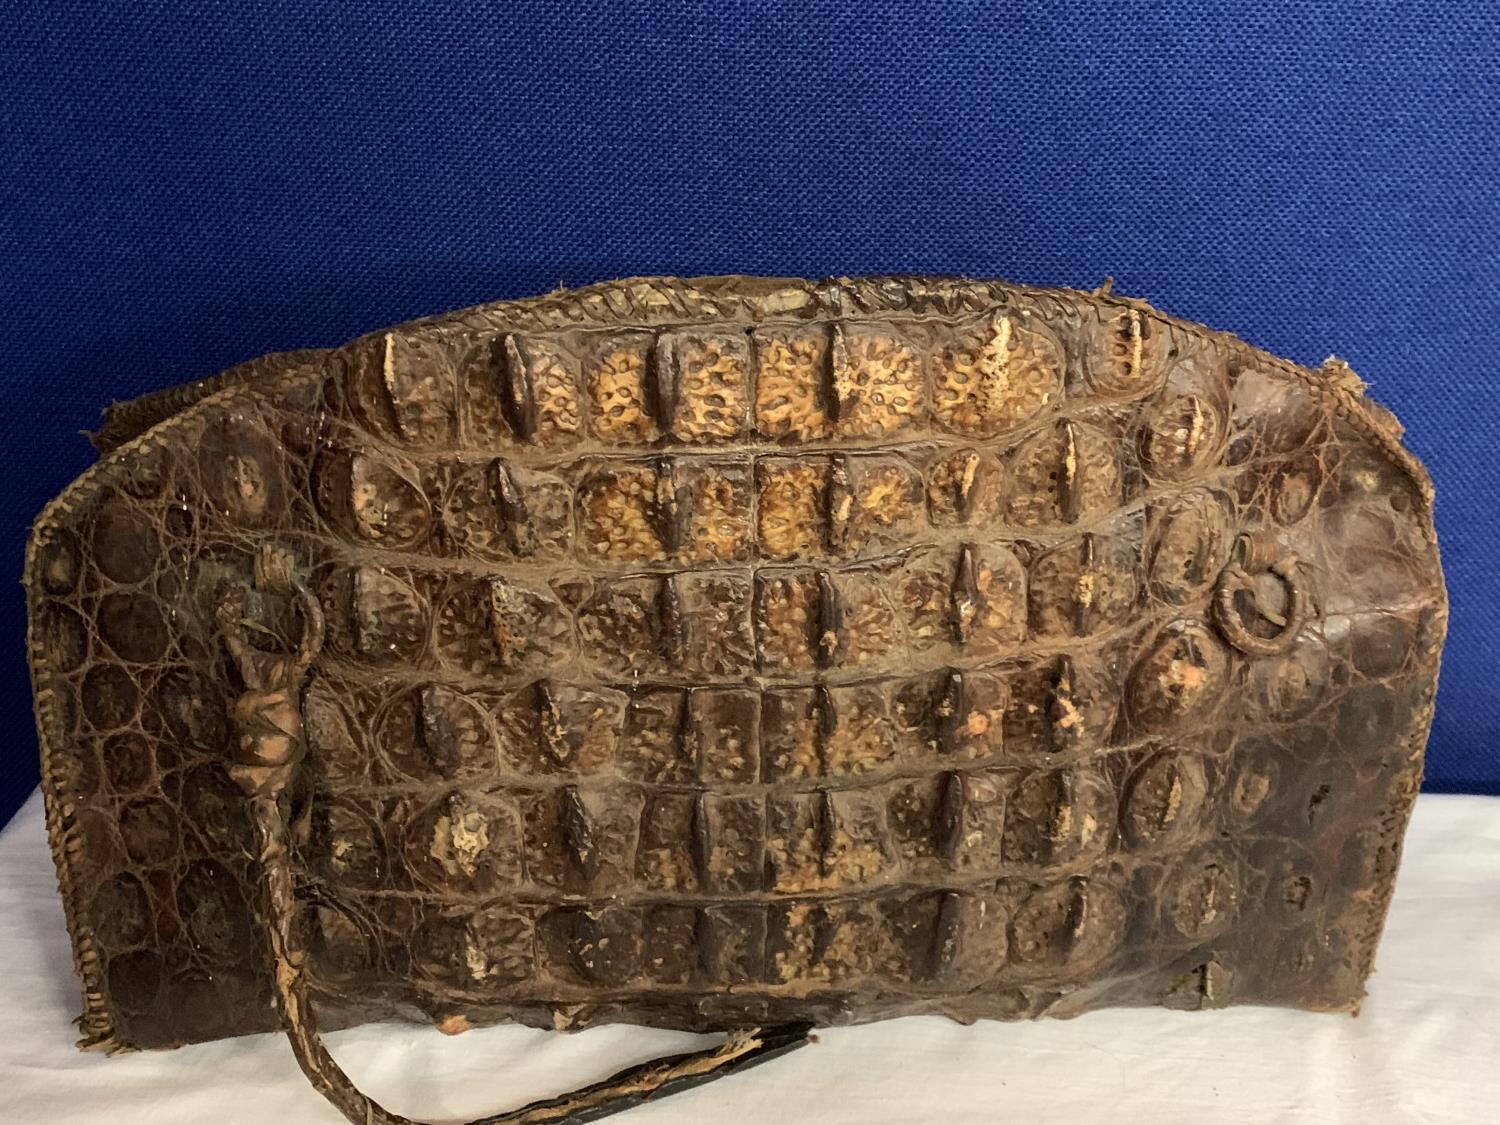 TWO VINTAGE HANDBAGS ONE CROCODILE AND THE OTHER SNAKESKIN - Image 3 of 5